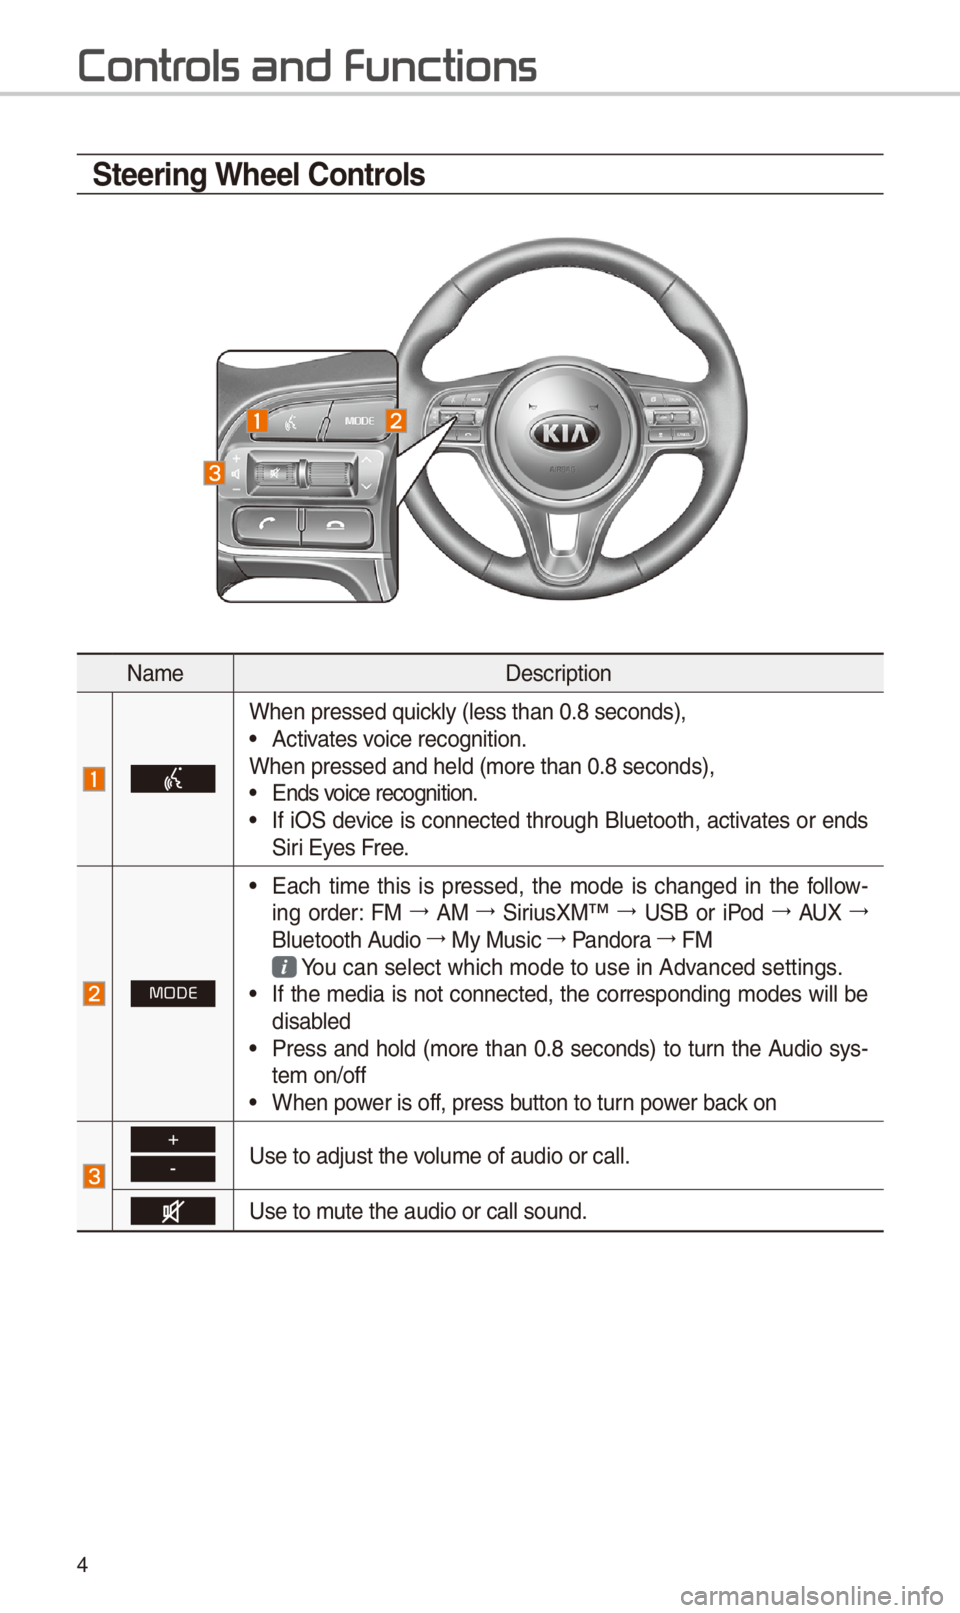 KIA OPTIMA 2018  Quick Reference Guide 4
Steering Wheel Controls
NameDescription
When pressed quickly (less than 0.8 \-seconds),• Activates voice recognition.
When pressed and he\-ld (more than 0.8 s\-econds),
• Ends voice recognition.